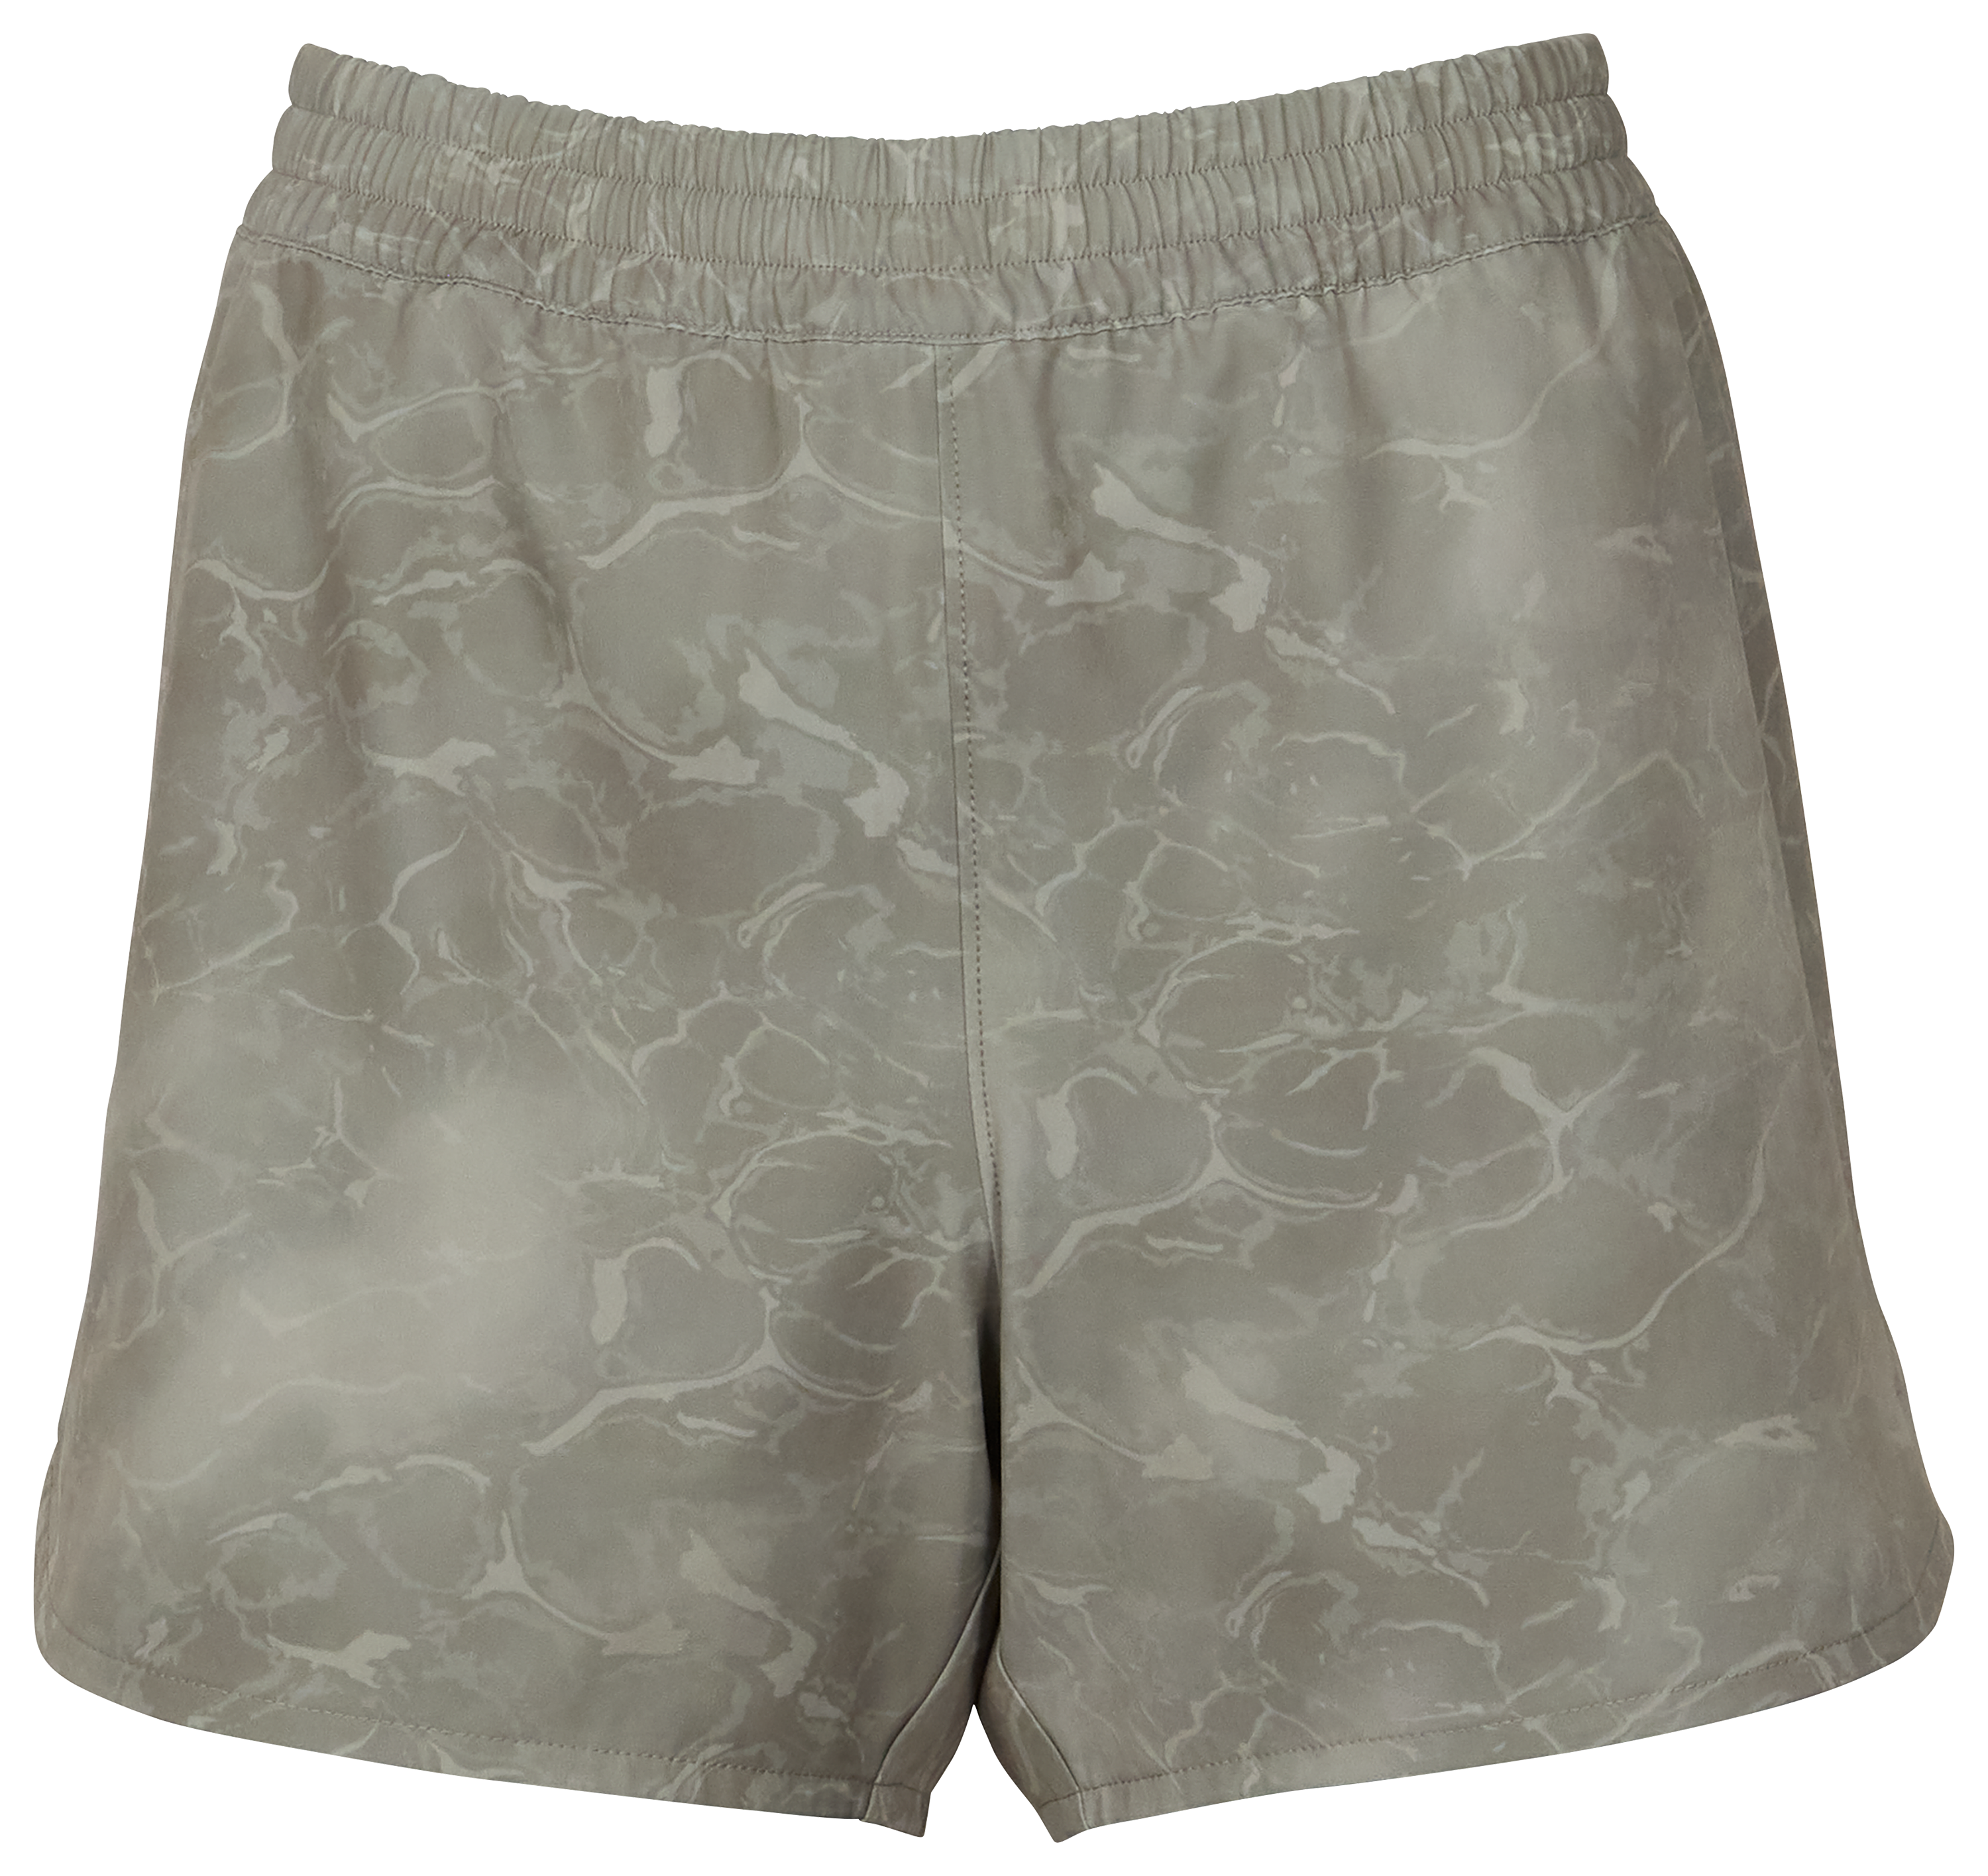 World Wide Sportsman Charter Print Pull-On Shorts for Ladies - Gray Water Camo - XXL